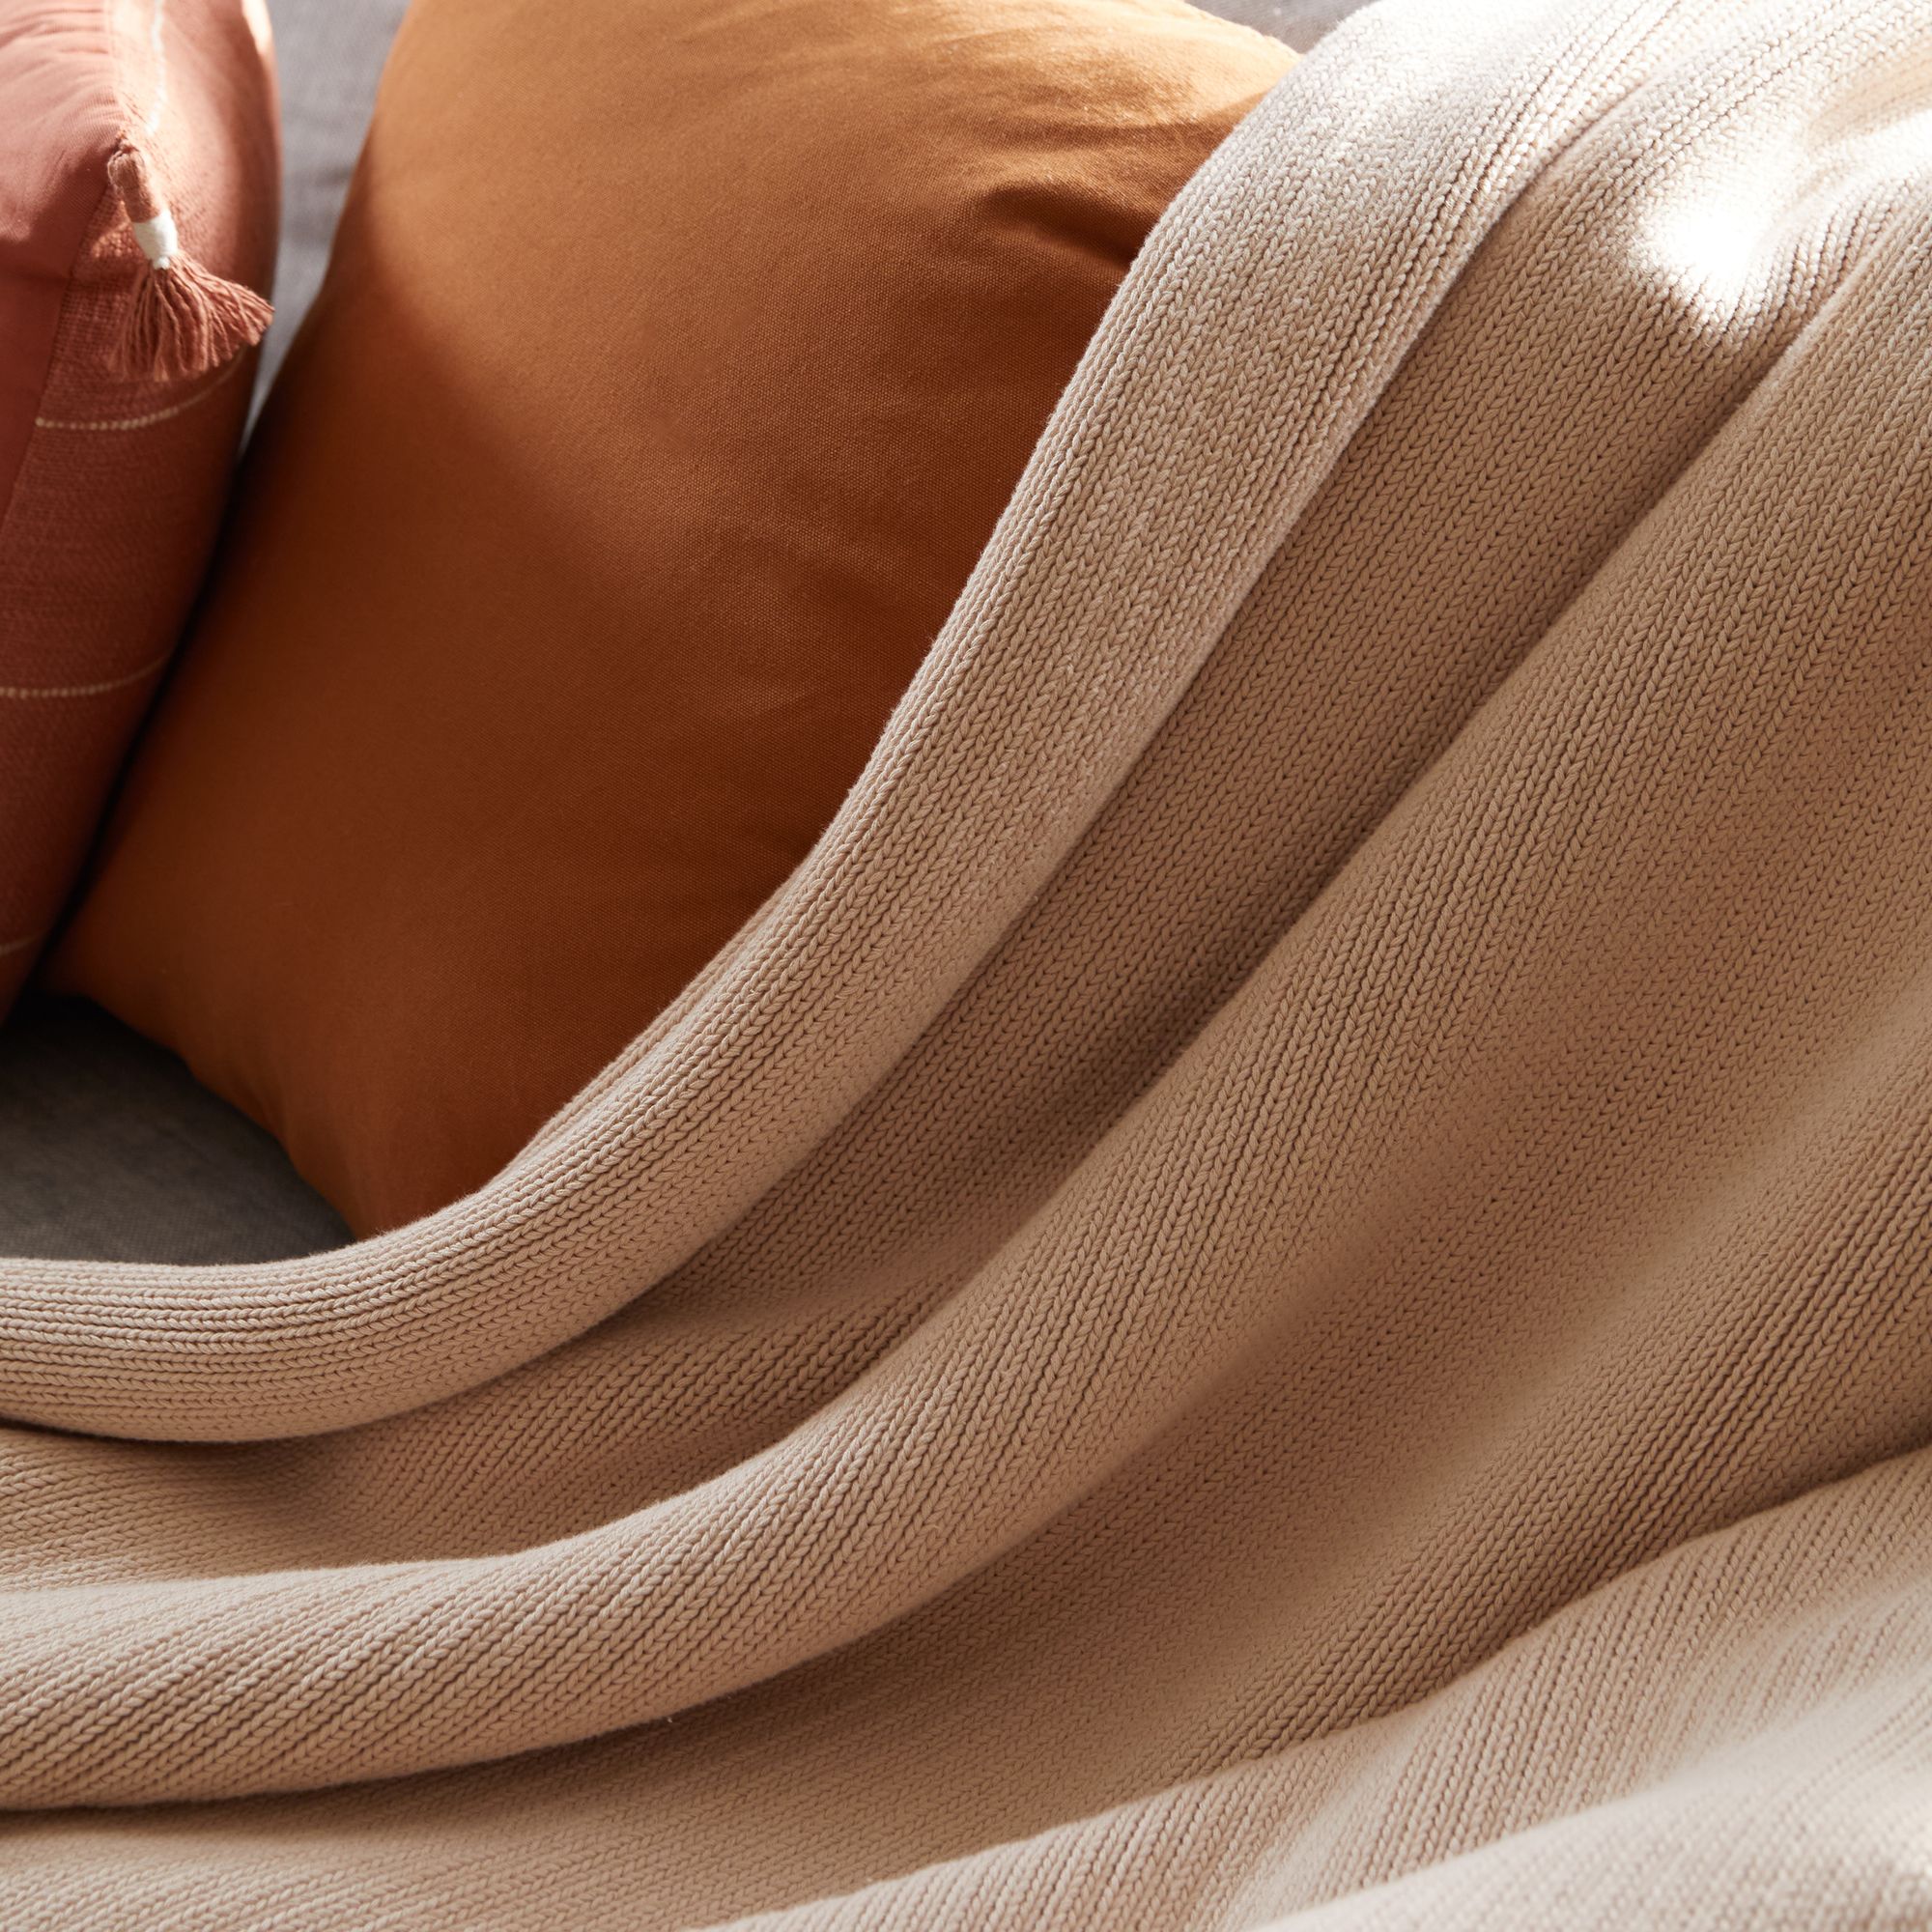 Eight benefits of a weighted blanket and why it's an essential bedroom item  - Lane Report